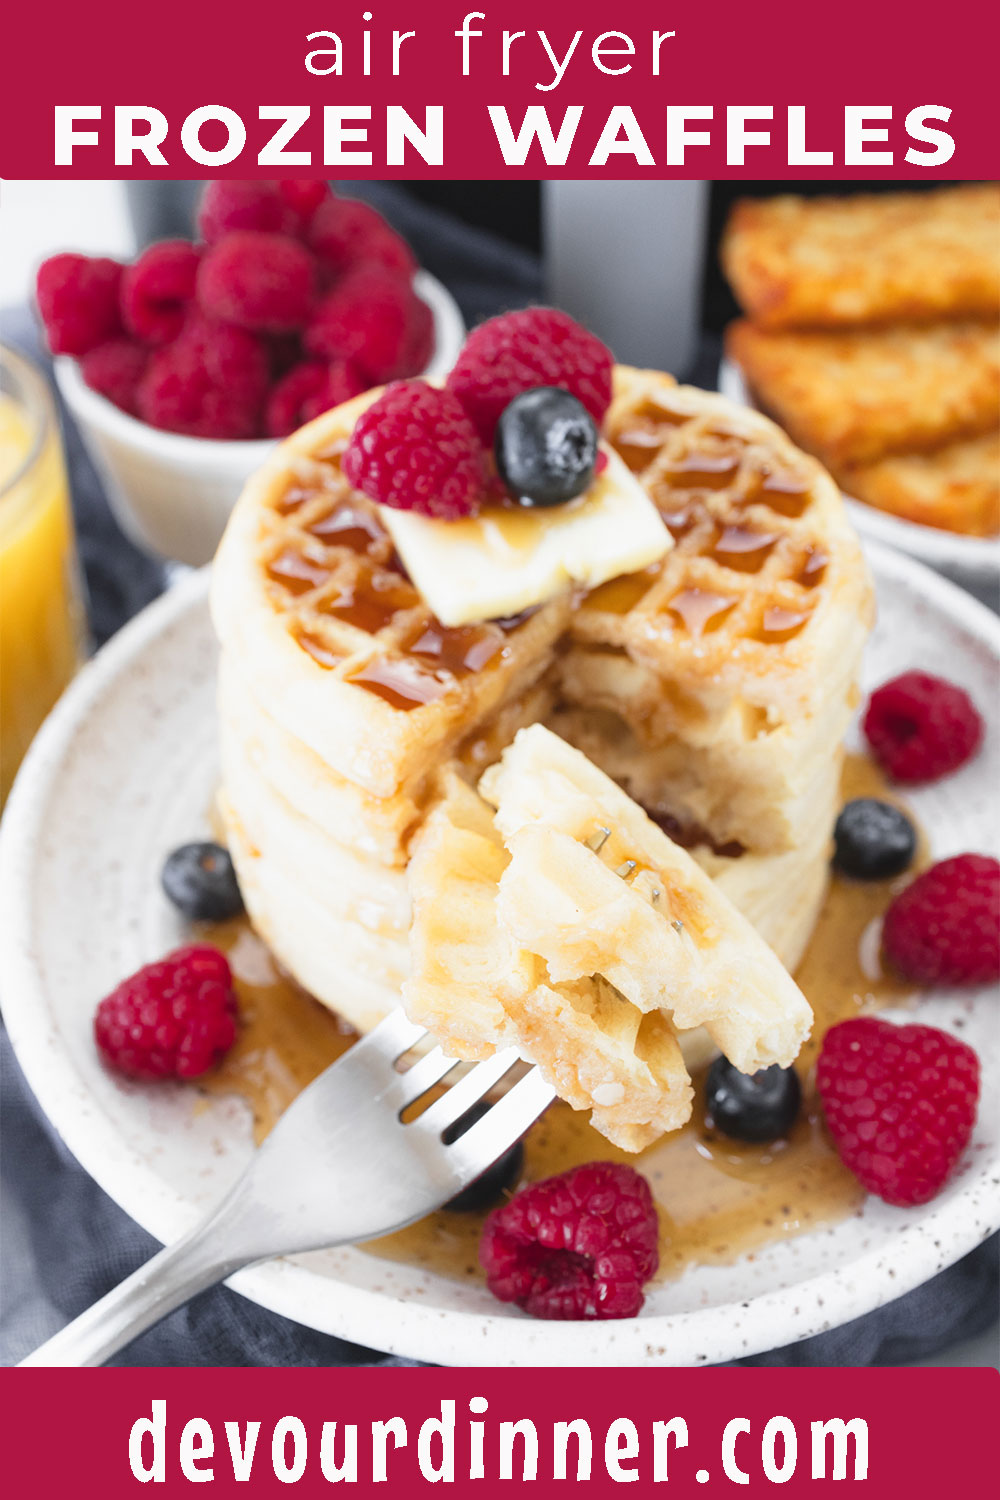 This Frozen Waffles in Air Fryer recipe delivers a deliciously crispy finish that's hard to achieve with a standard toaster or waffle iron! Perfect for any day of the week, these air fryer waffles come out hot and crispy, ready to be topped with your favorite additions like fresh berries or maple syrup!